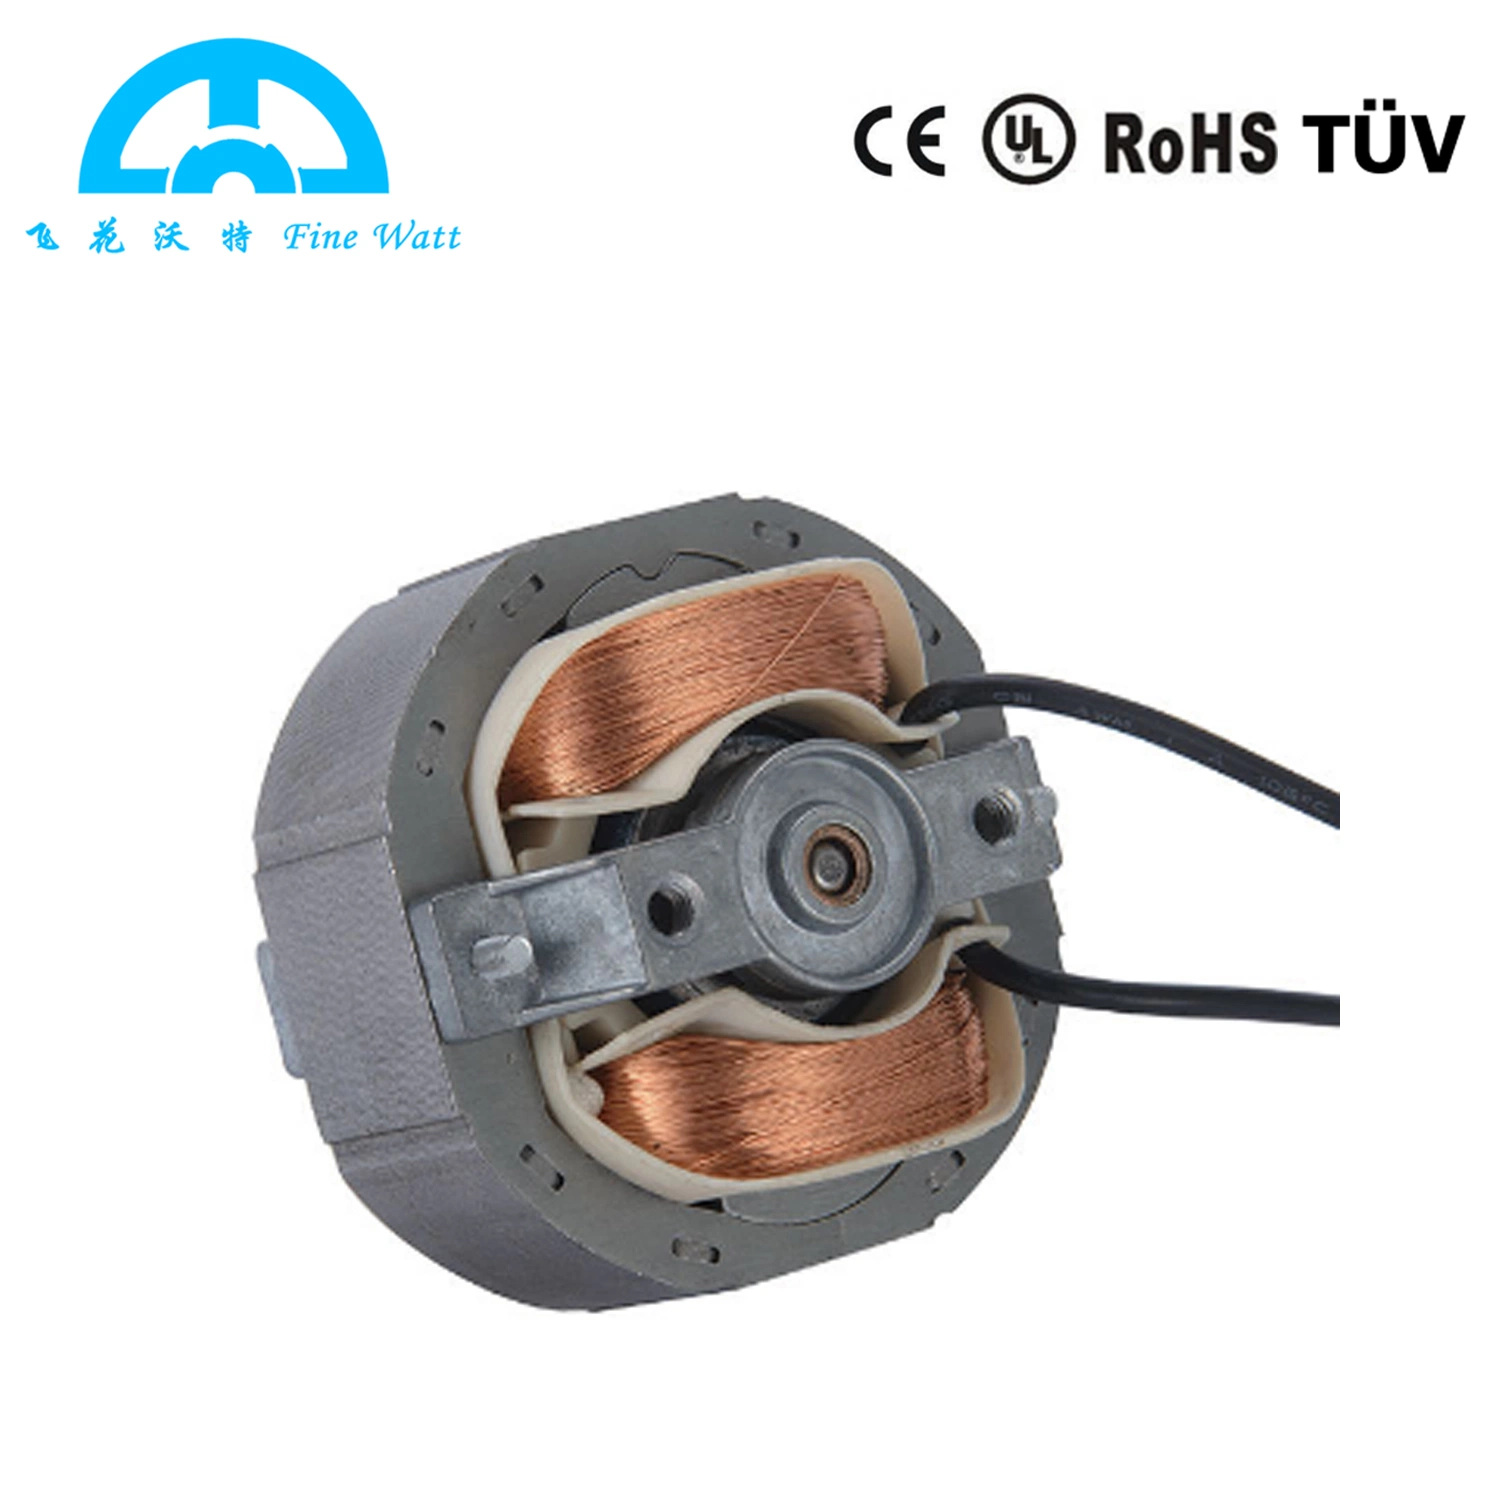 AC Electric 5810 5812 5816 5820 Shaded Pole Motor for Bathroom Ventilation Oven Exhause Fan Warm Air Blower Heater Hydrating Aromatherapy Machine Warm Windown